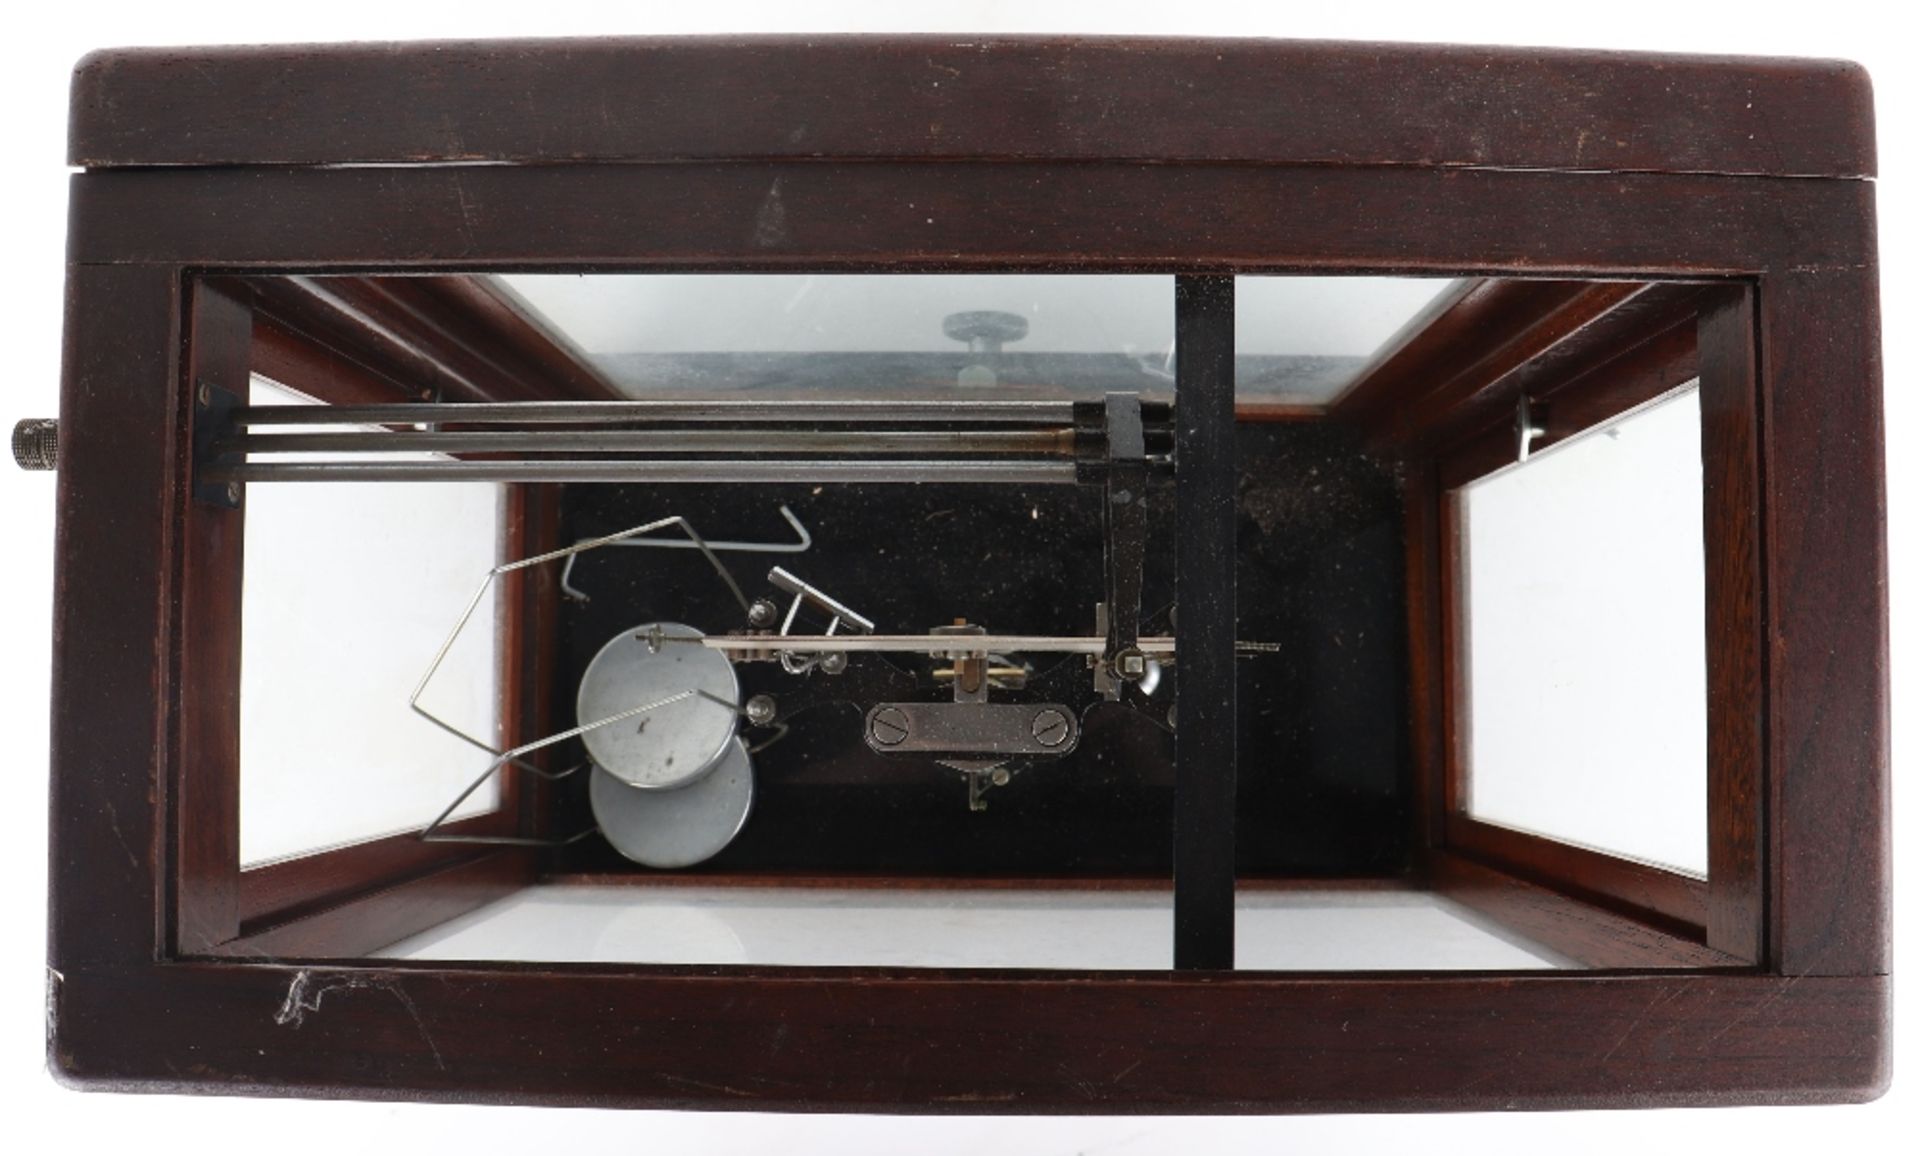 A Townson & Mercer set of scales, in glass, oak and mahogany case - Image 10 of 10